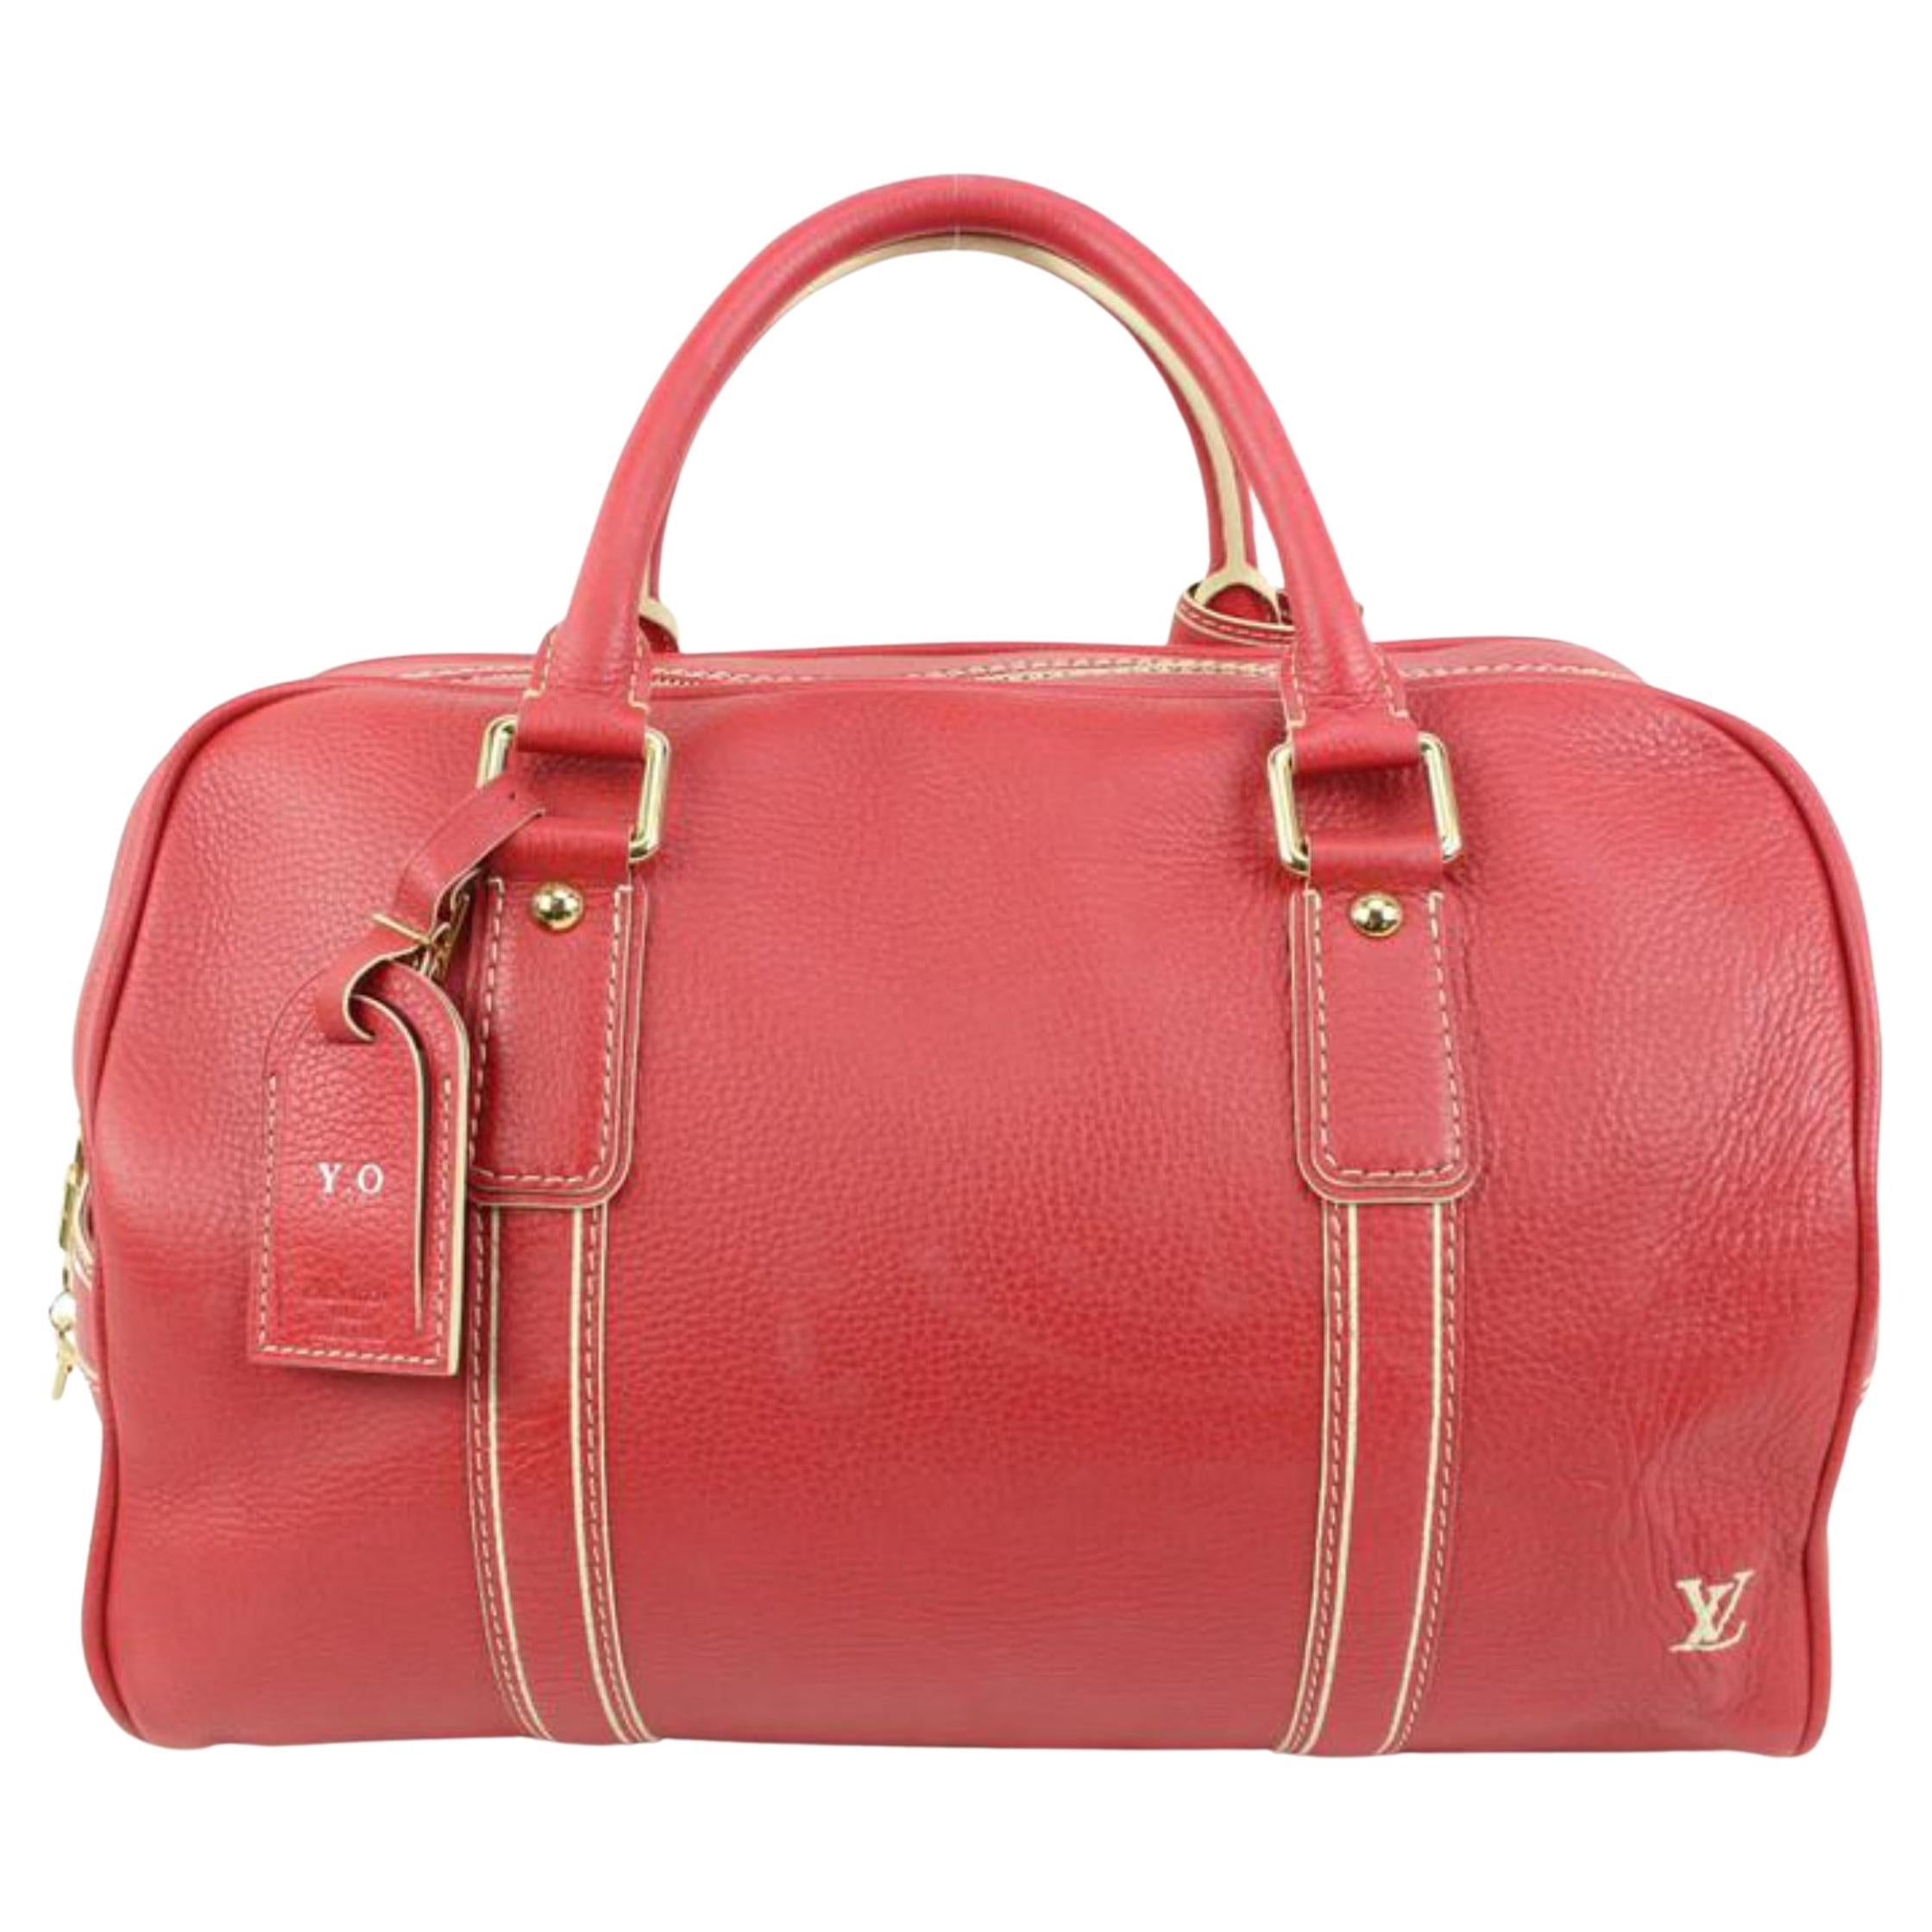 Louis Vuitton Red Tobago Leather Carryall Boston Duffle 40lk324s